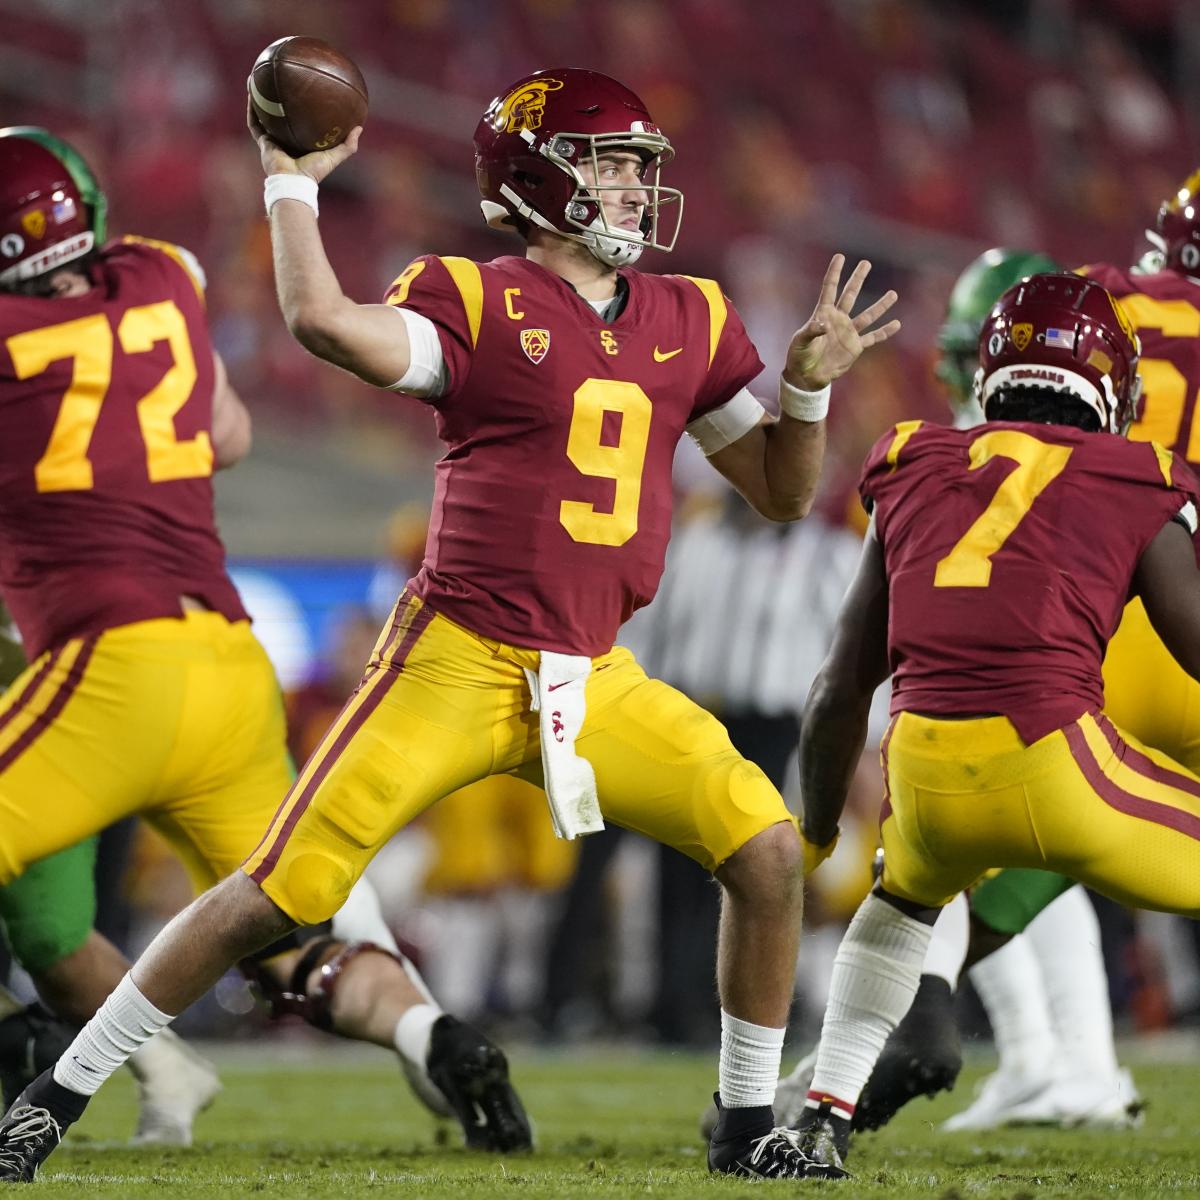 USC Spring Game 2021 Top Storylines and Prospects to Watch News